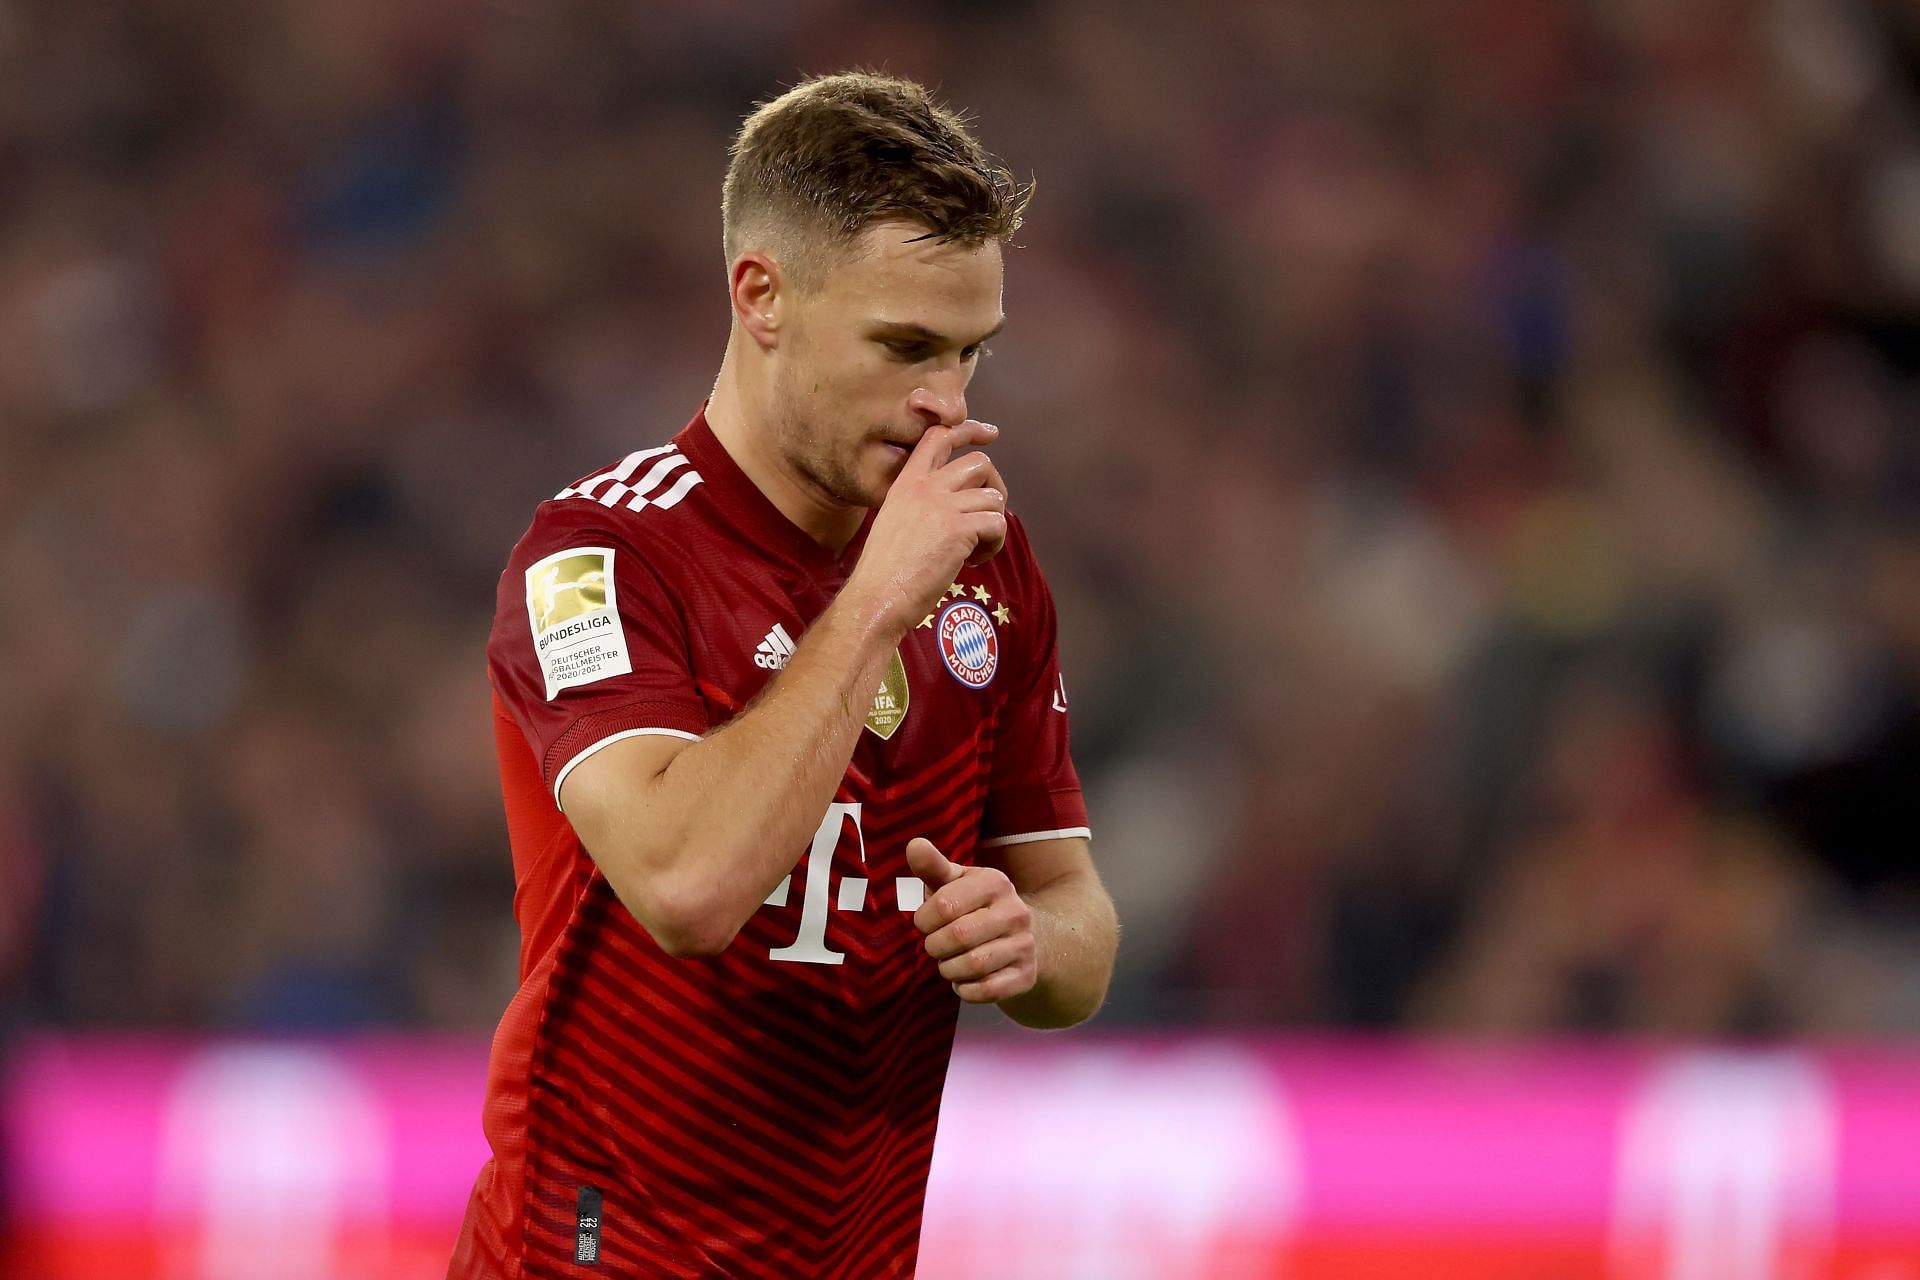 Joshua Kimmich is touted as a future Germany captain